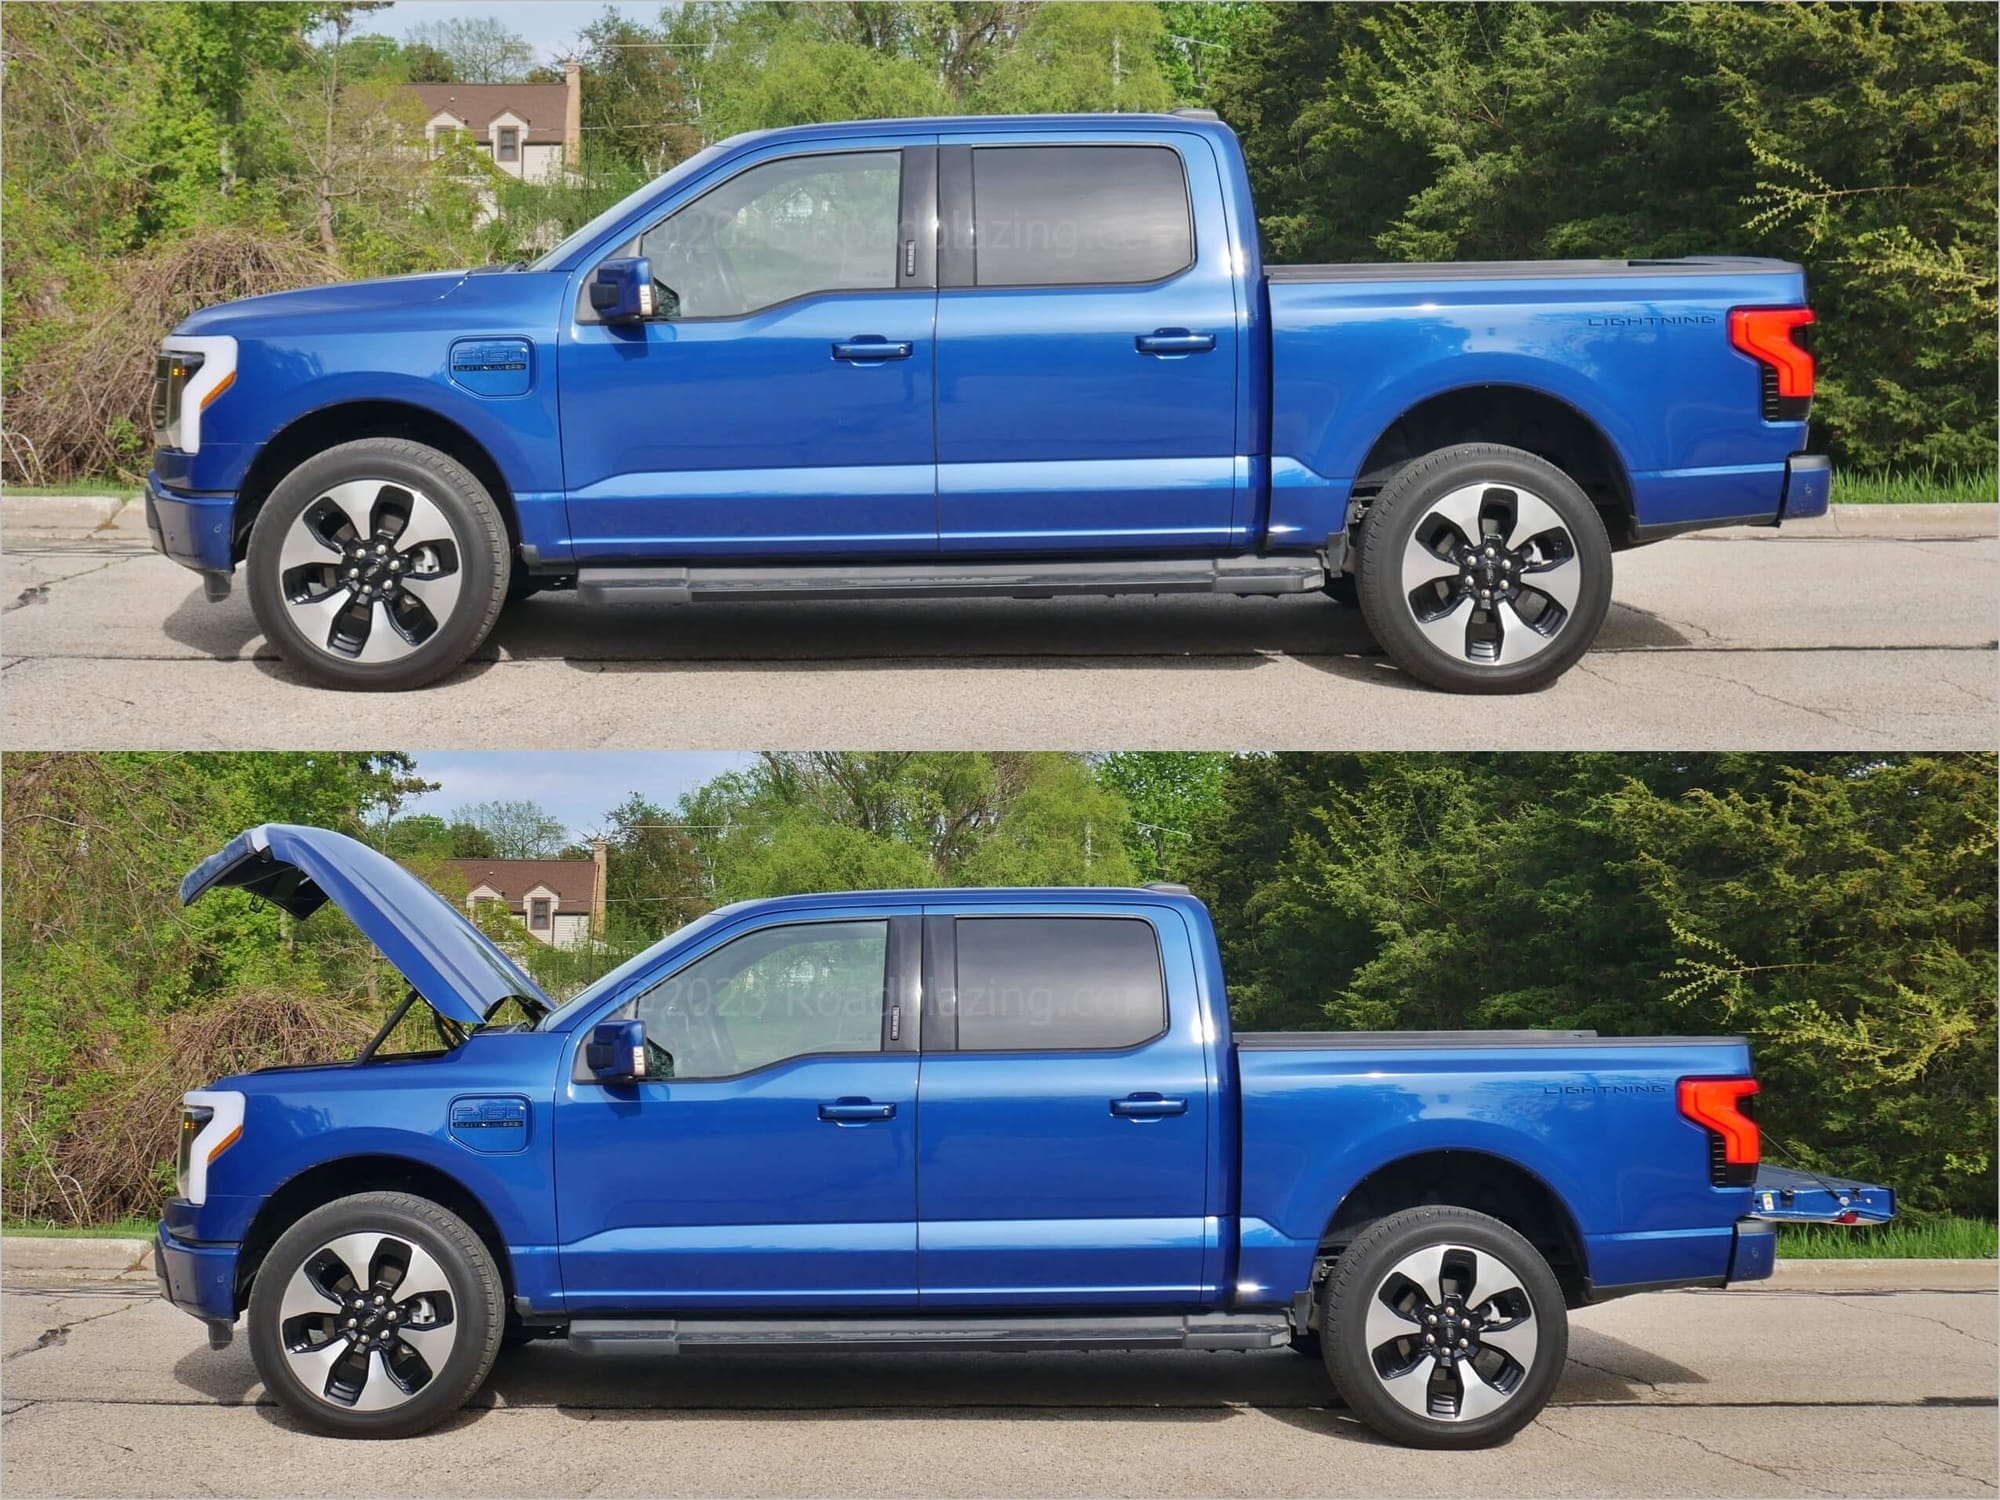 2022 Ford F-150 Lightning Platinum 4x4: only the front left fender power supply port door and what's not underhood are clues that this flareside supercrew cab F-Series runs on electrons.